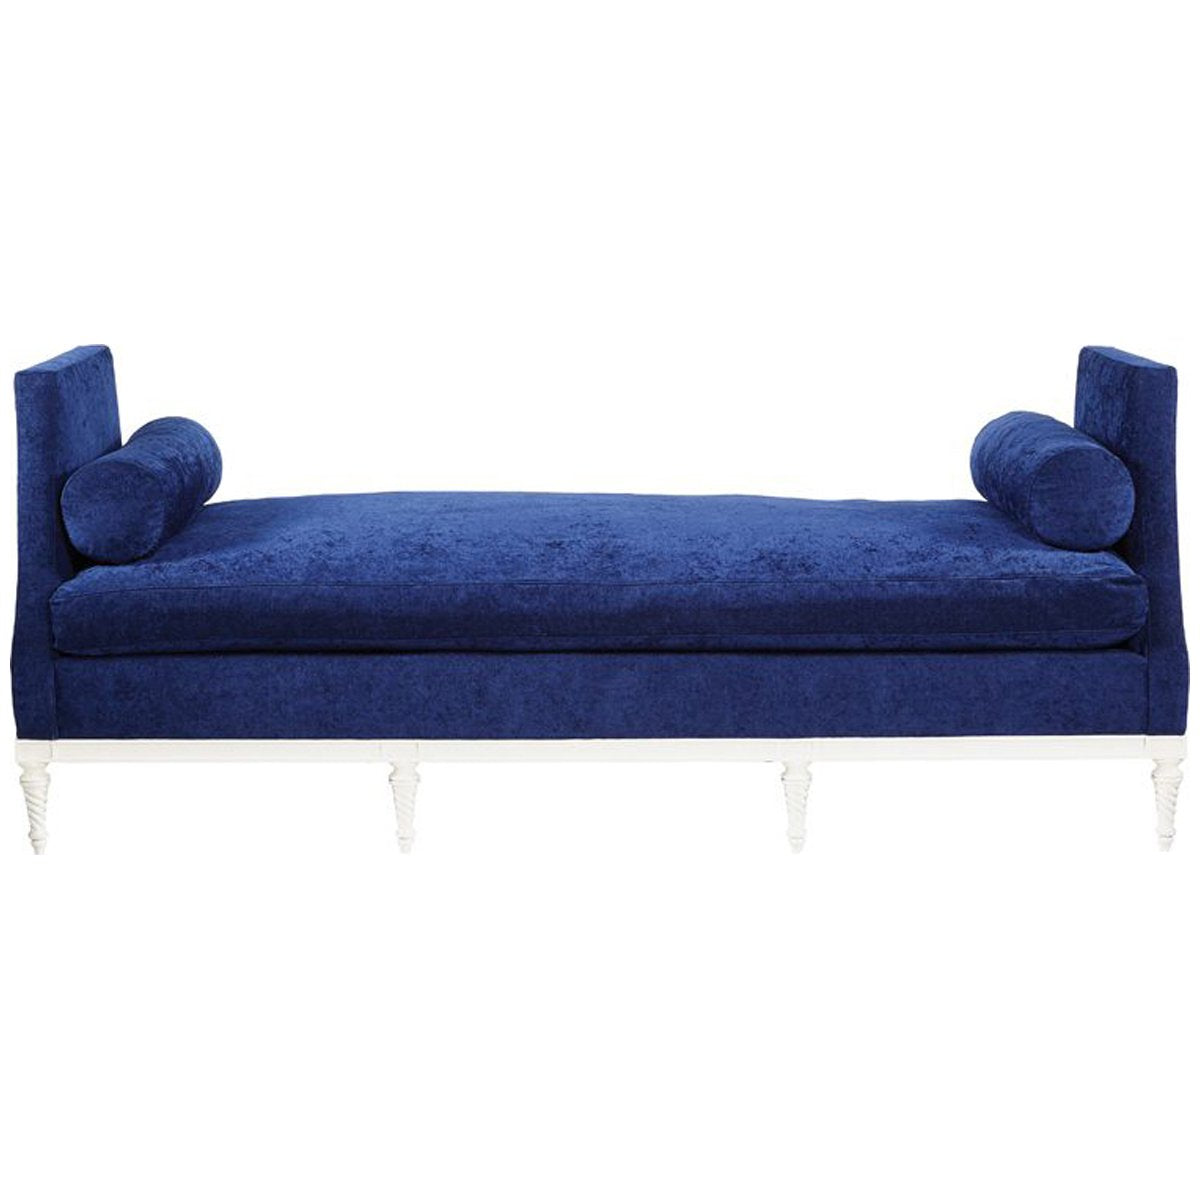 Lillian August Josephine Daybed